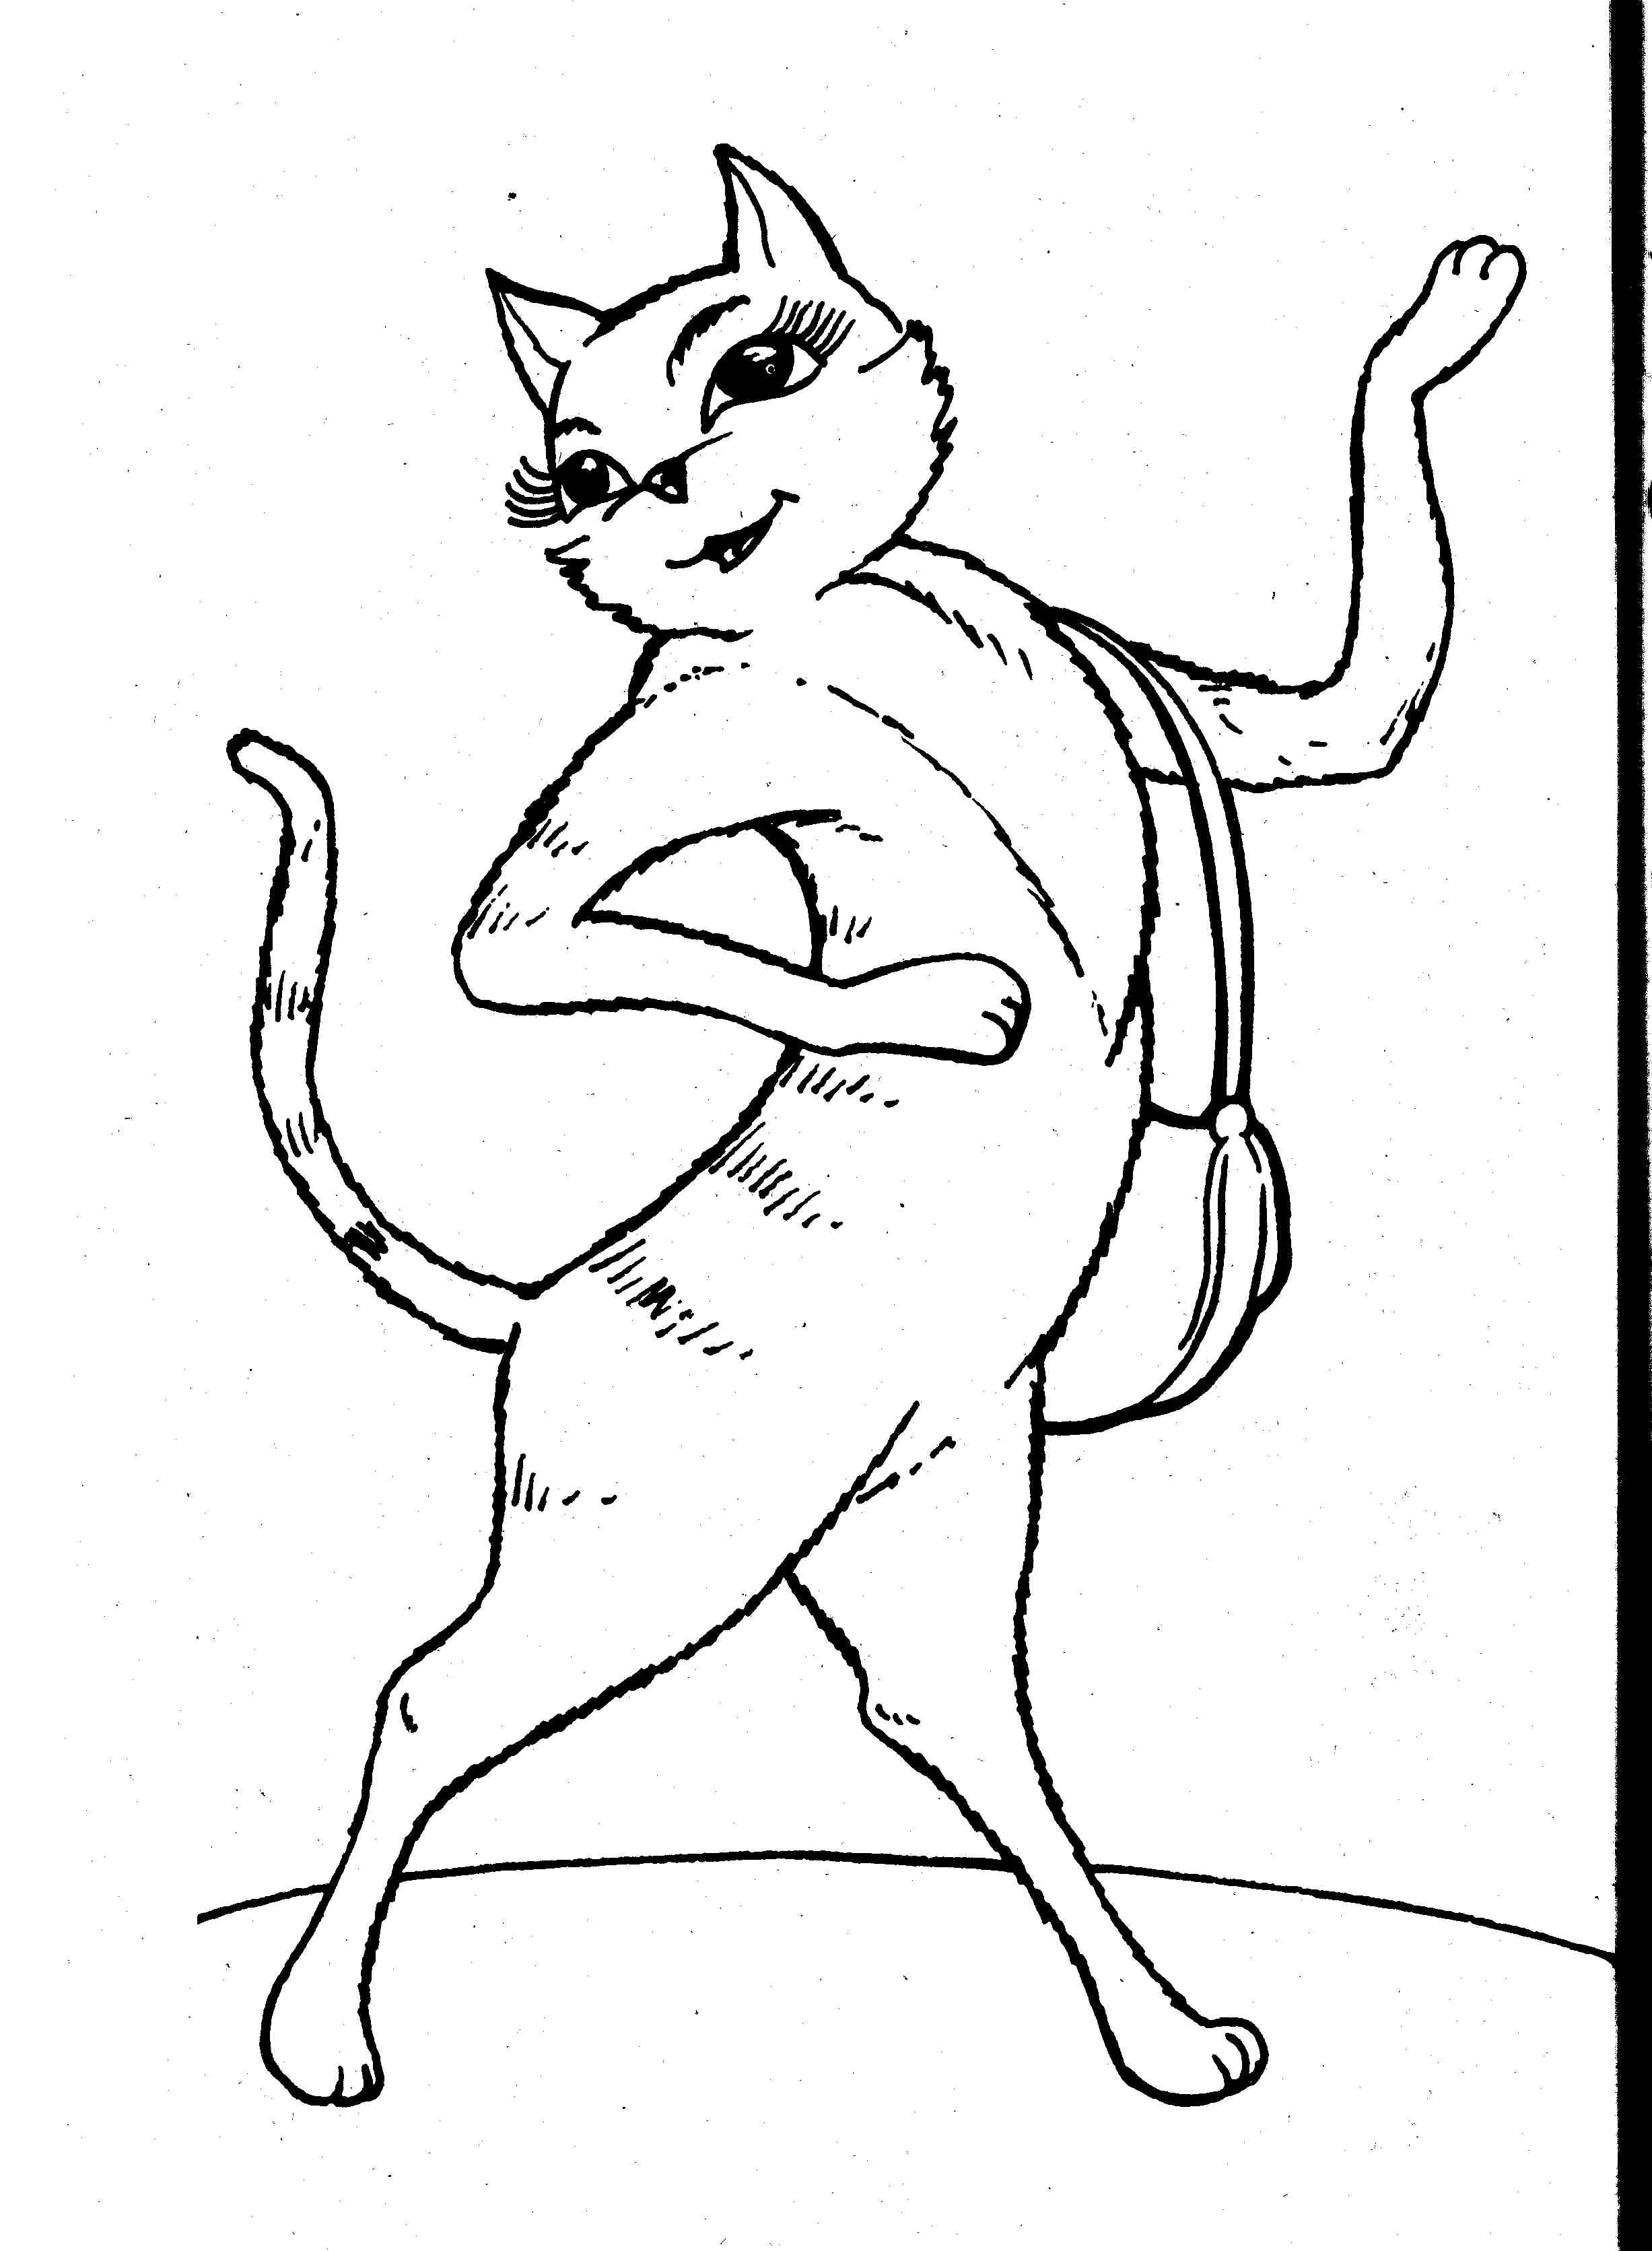  Cat Coloring Pages | Cats Coloring pages |Kitten Coloring pages | Cool cats | #11